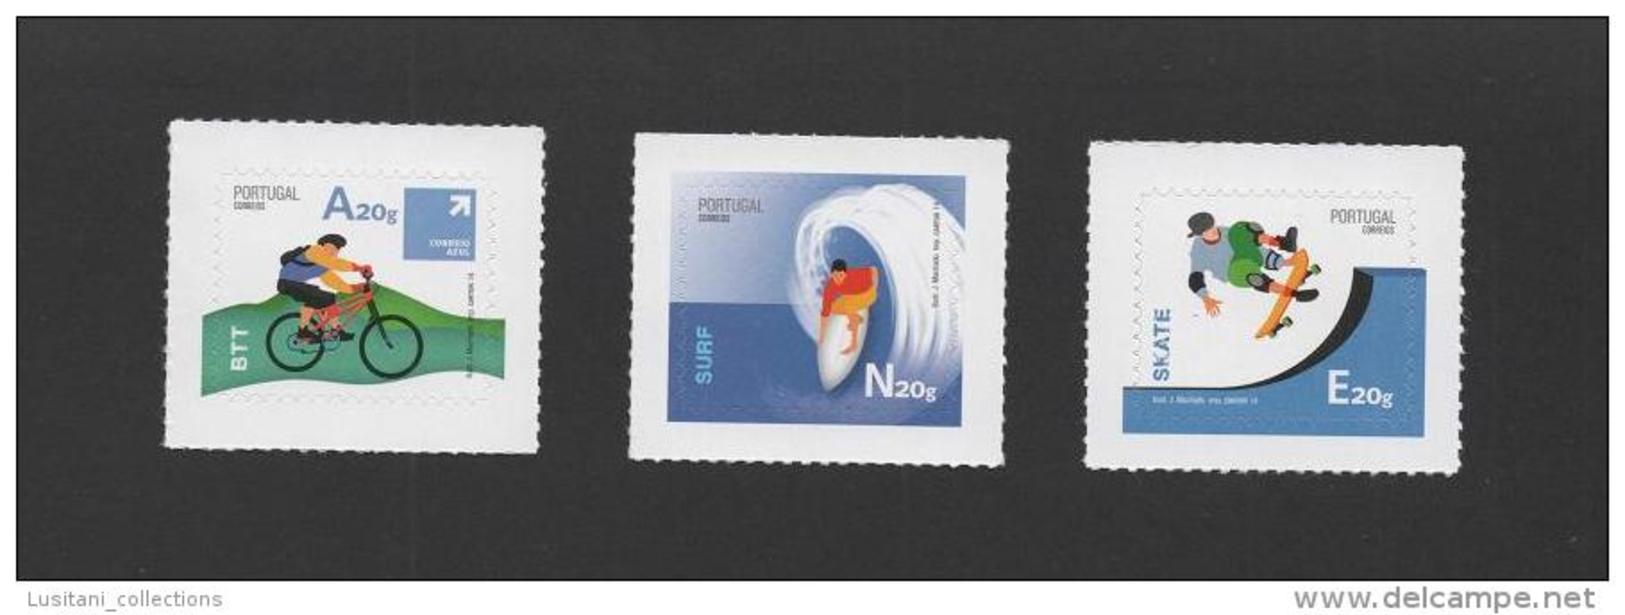 LABEL STAMPS 2014 PORTUGAL EXTREME SPORTS SURF SURFING SKATE BIKE CYCLING - Unused Stamps